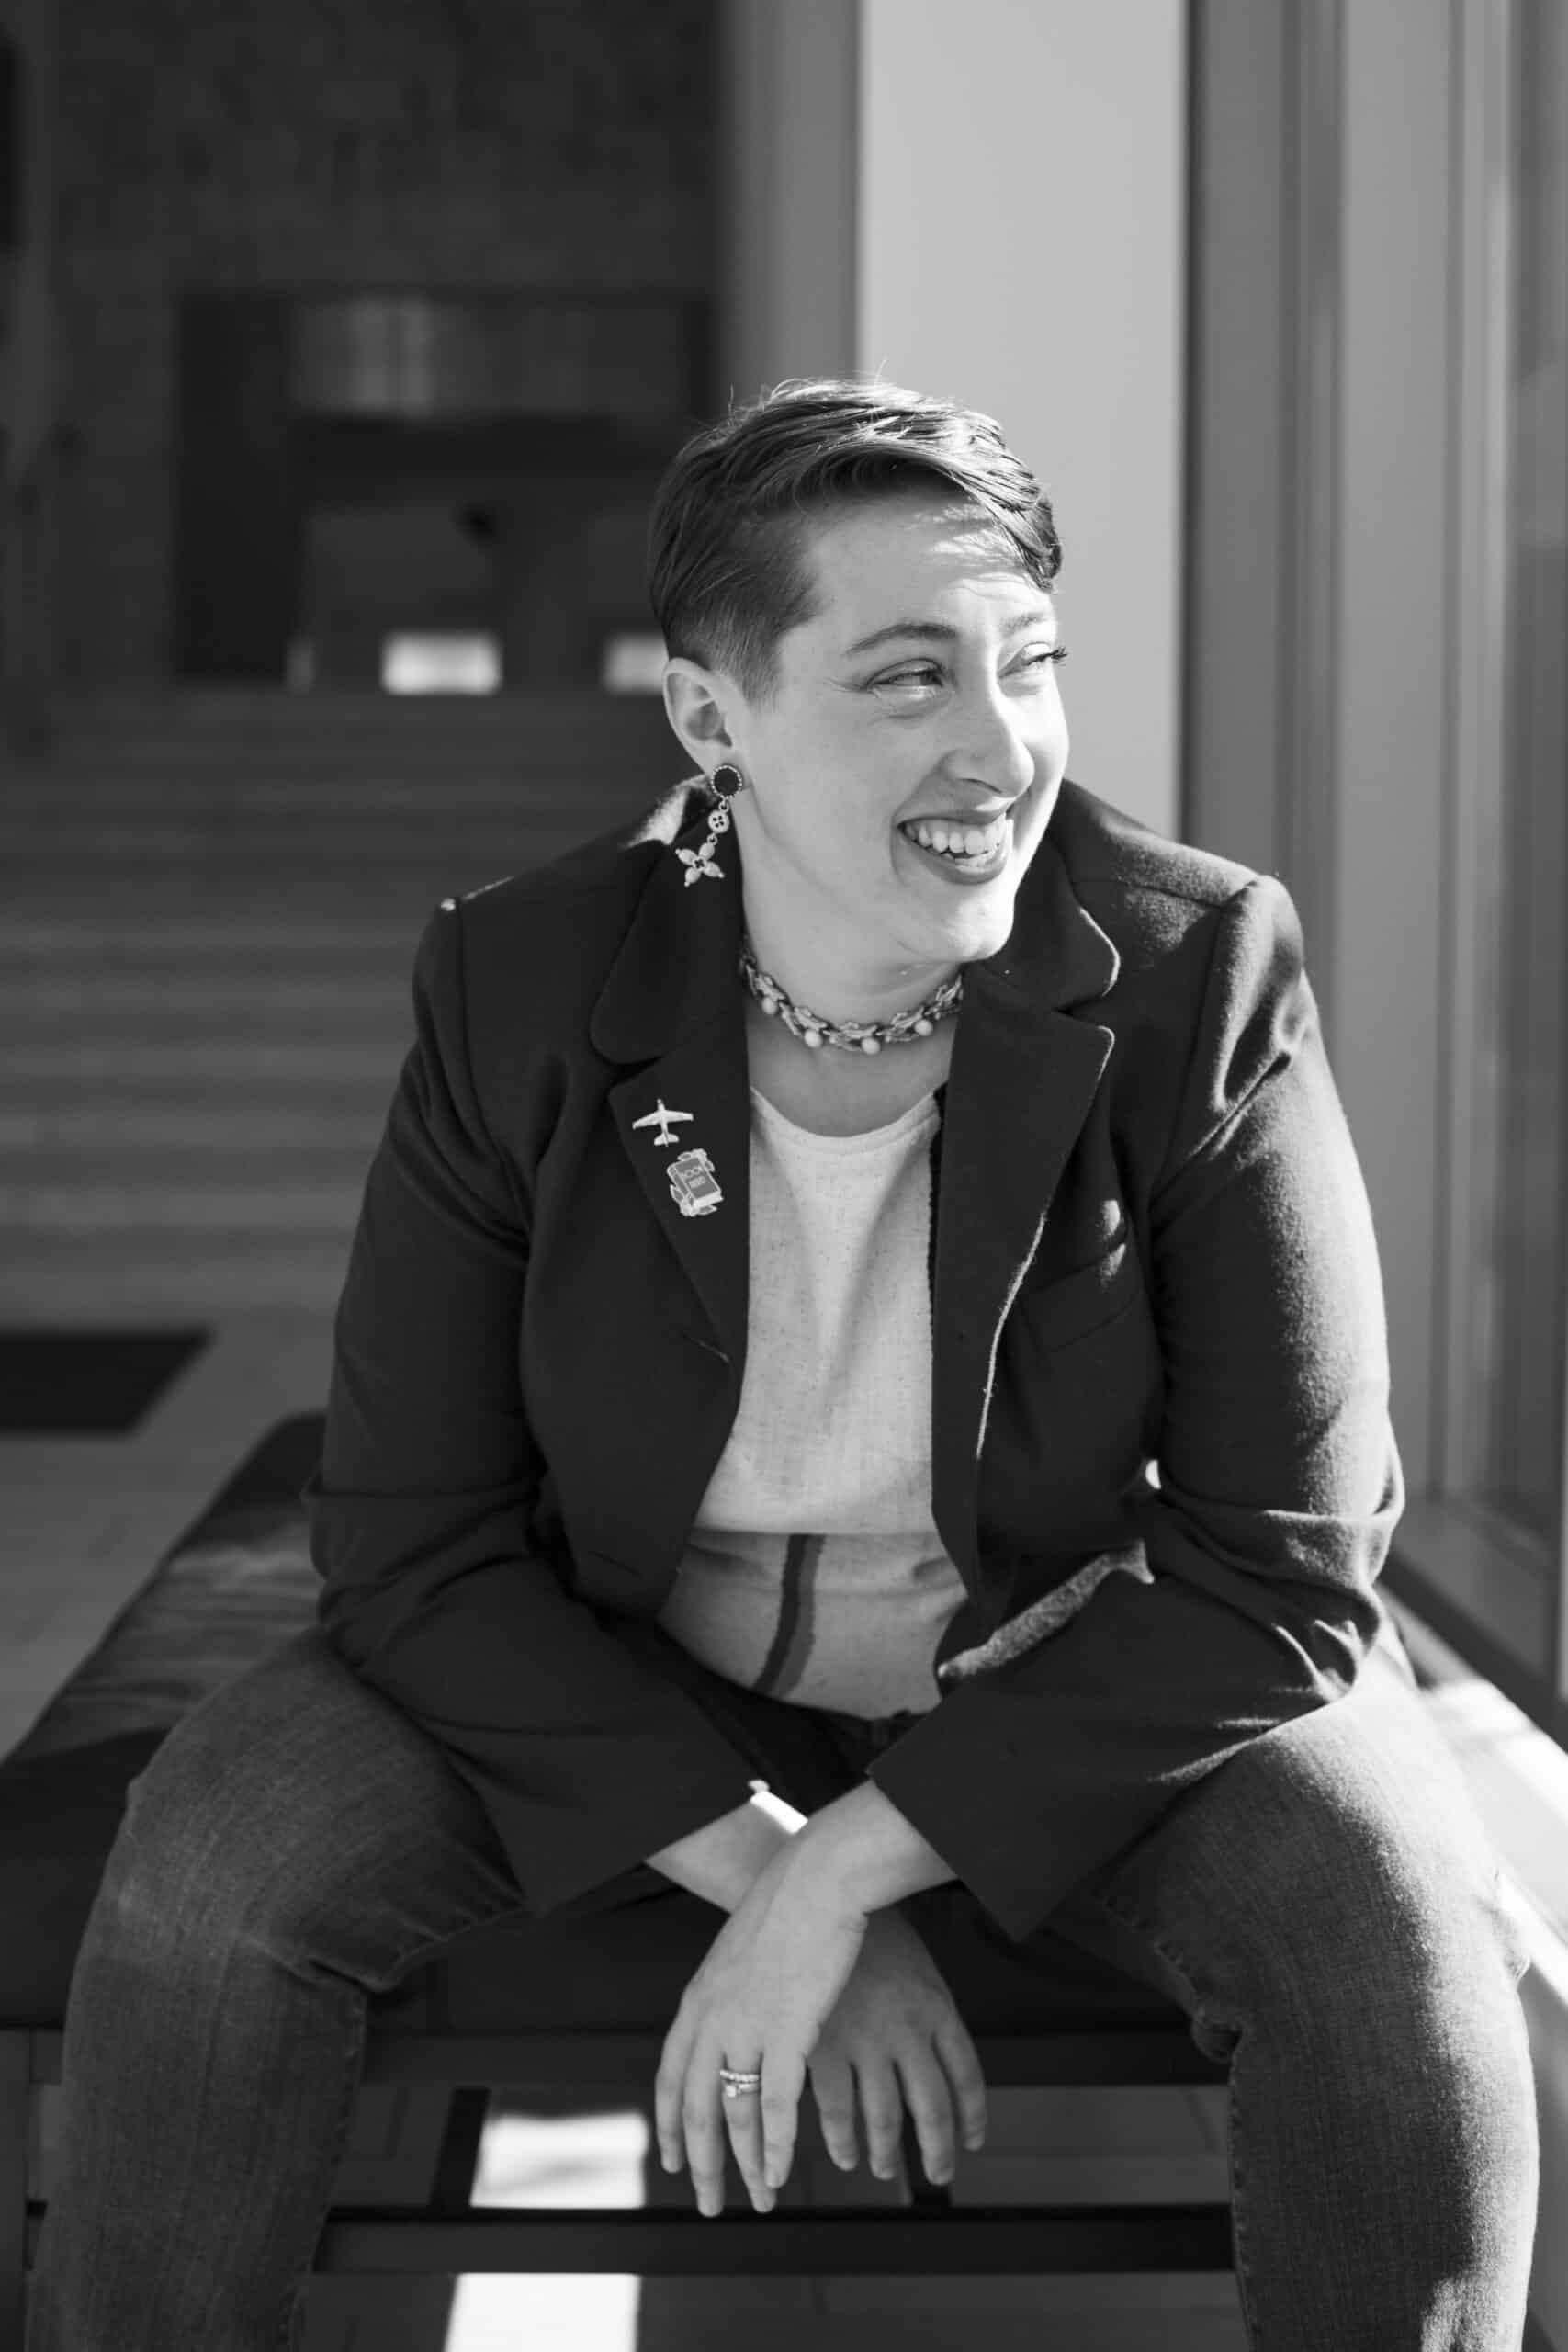 Mandy has short hair, dangling earrings and fair skin. They wear a blazer and look away from the camera while laughing. The photo is in black and white. 